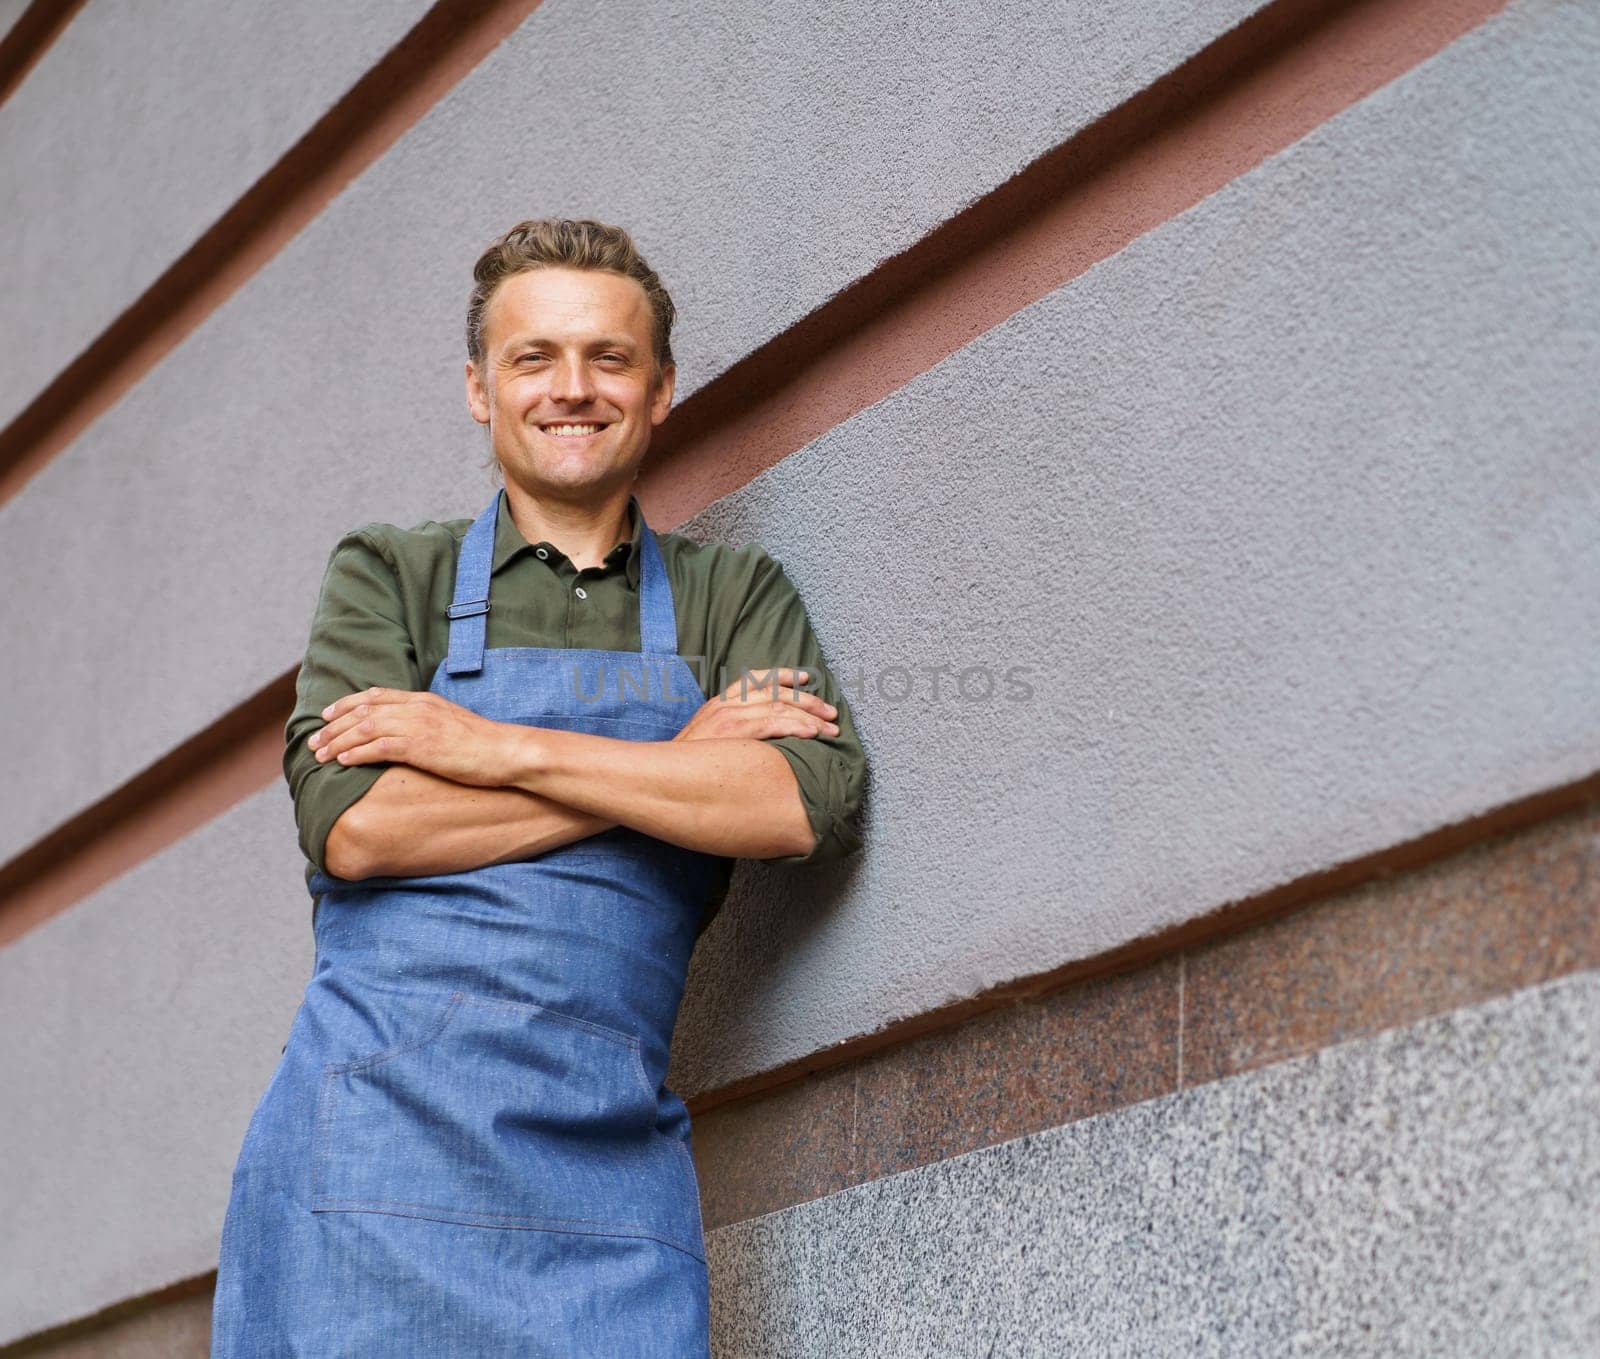 Waiter or service man positioned against a restaurant wall. With a professional demeanor, the individual exudes confidence and embodies the core values of hospitality and customer service. . High quality photo